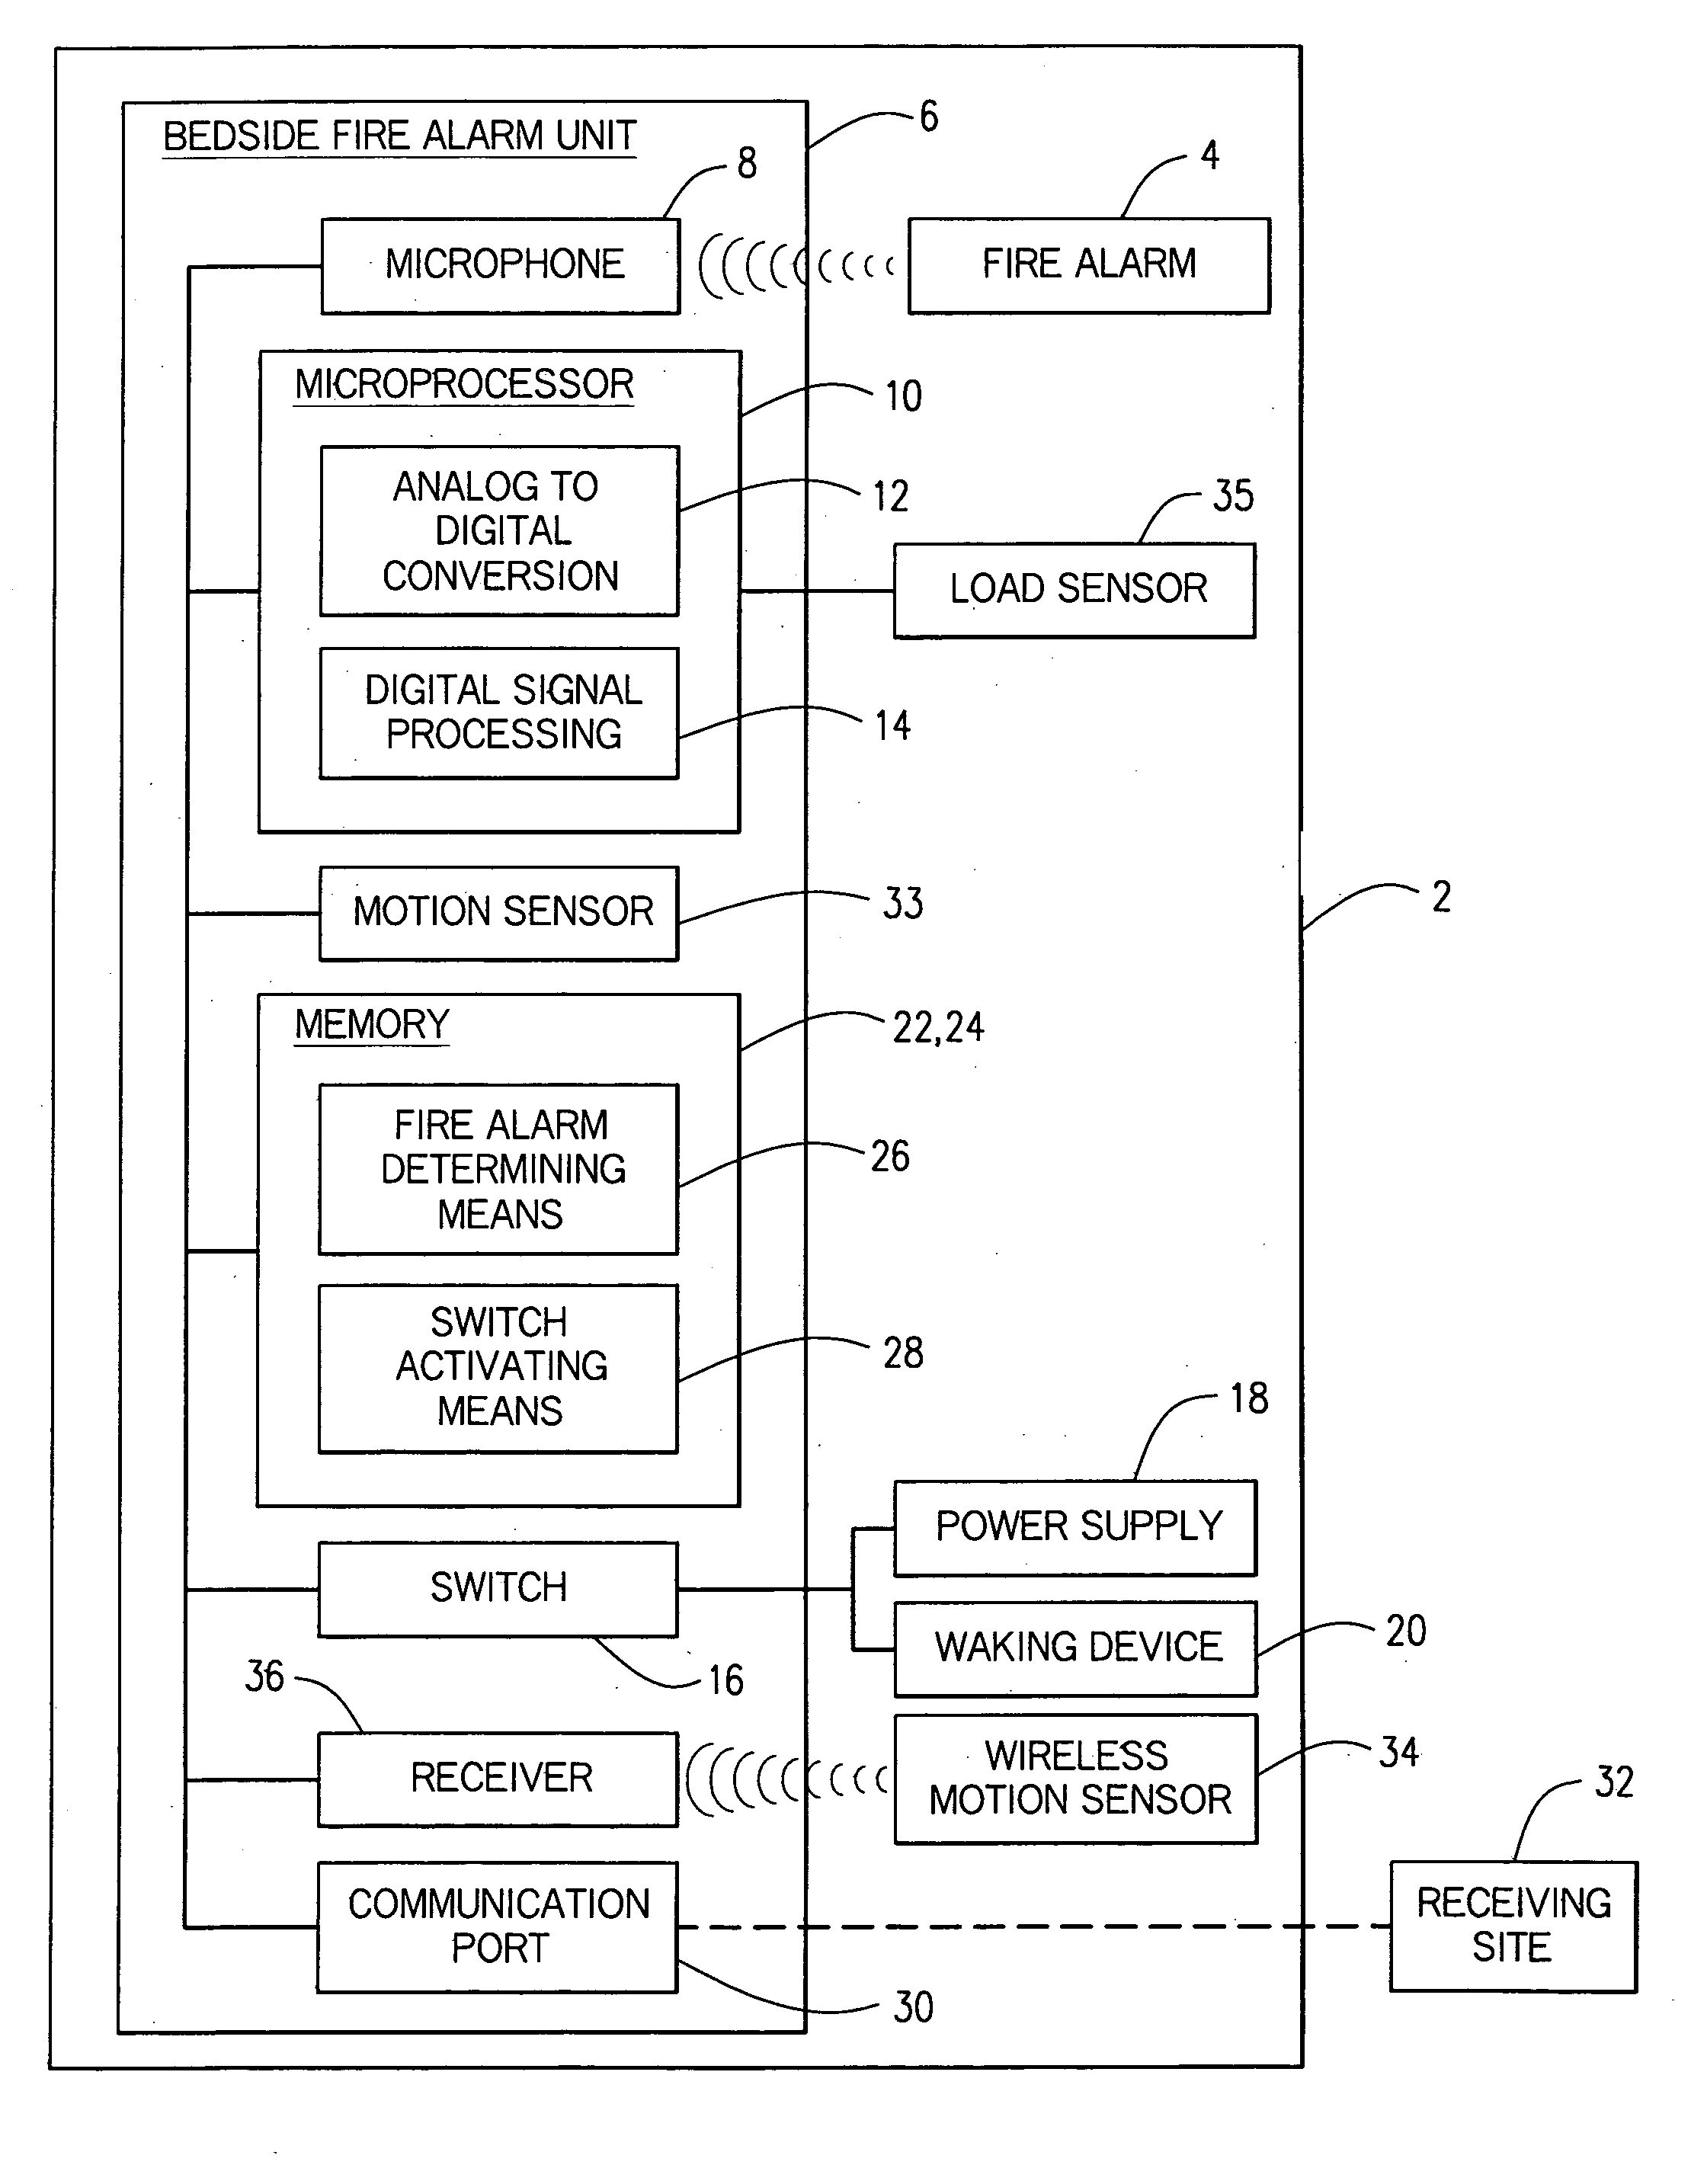 Enhanced fire, safety, security, and health monitoring and alarm response method, system and device